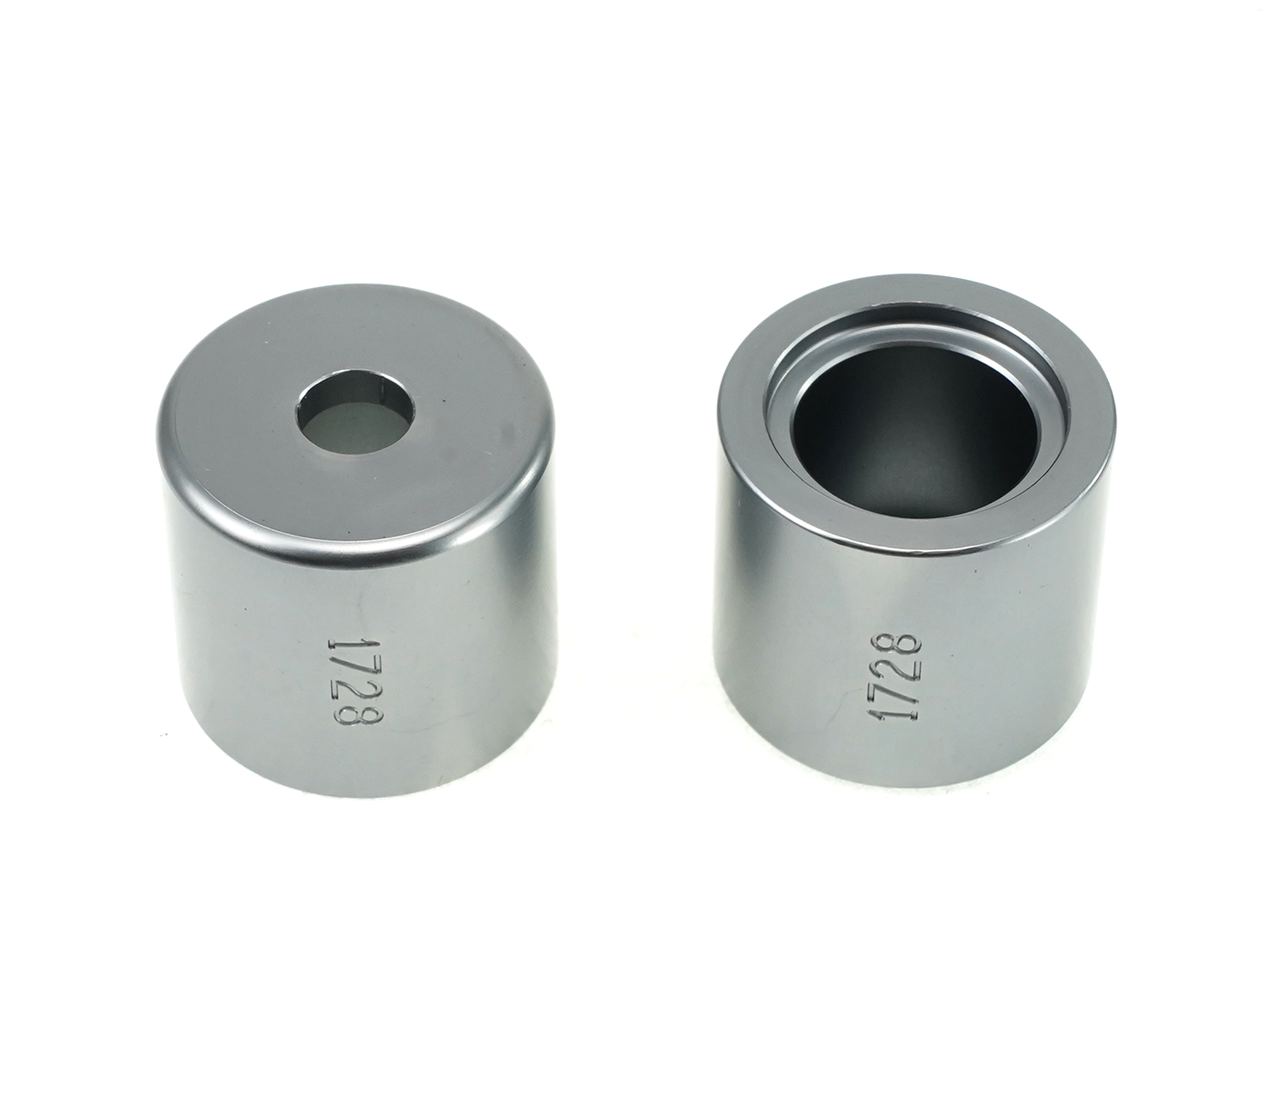 Enduro HT MR 1728 Outer - Outer Bearing Guide for Bearing Press (BRT-005 or BRT-050) - single guide only